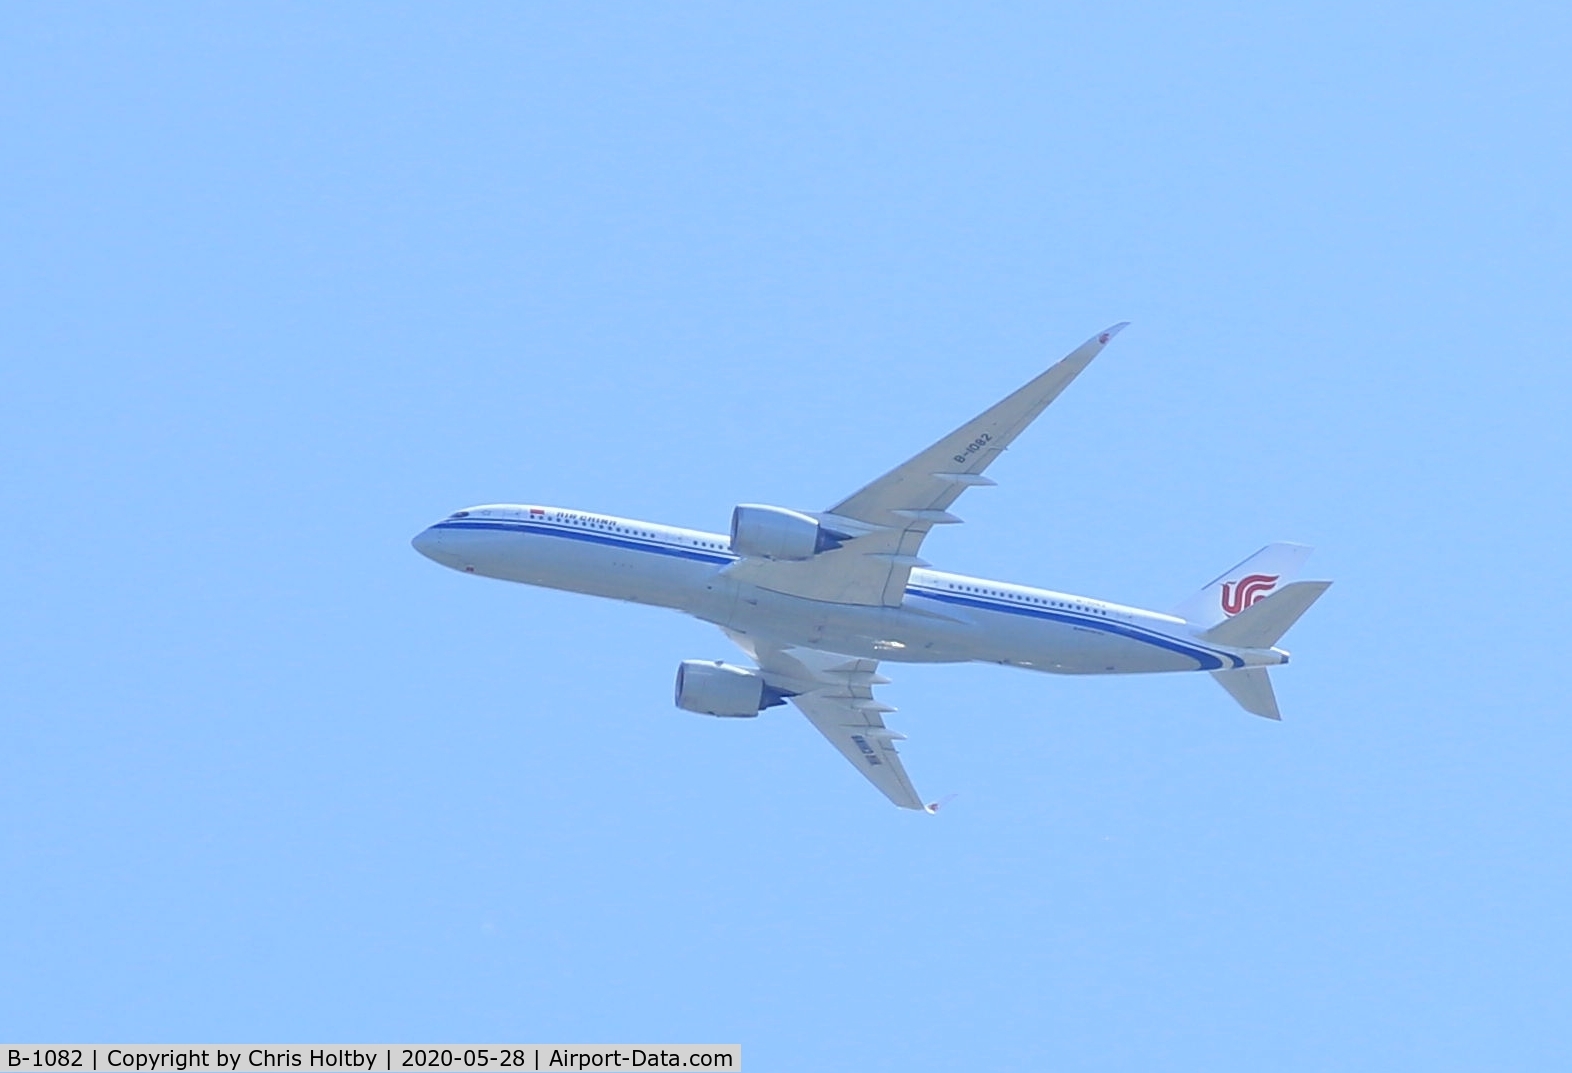 B-1082, 2018 Airbus A350-941 C/N 231, Taken off from Heathrow on its way to Beijing